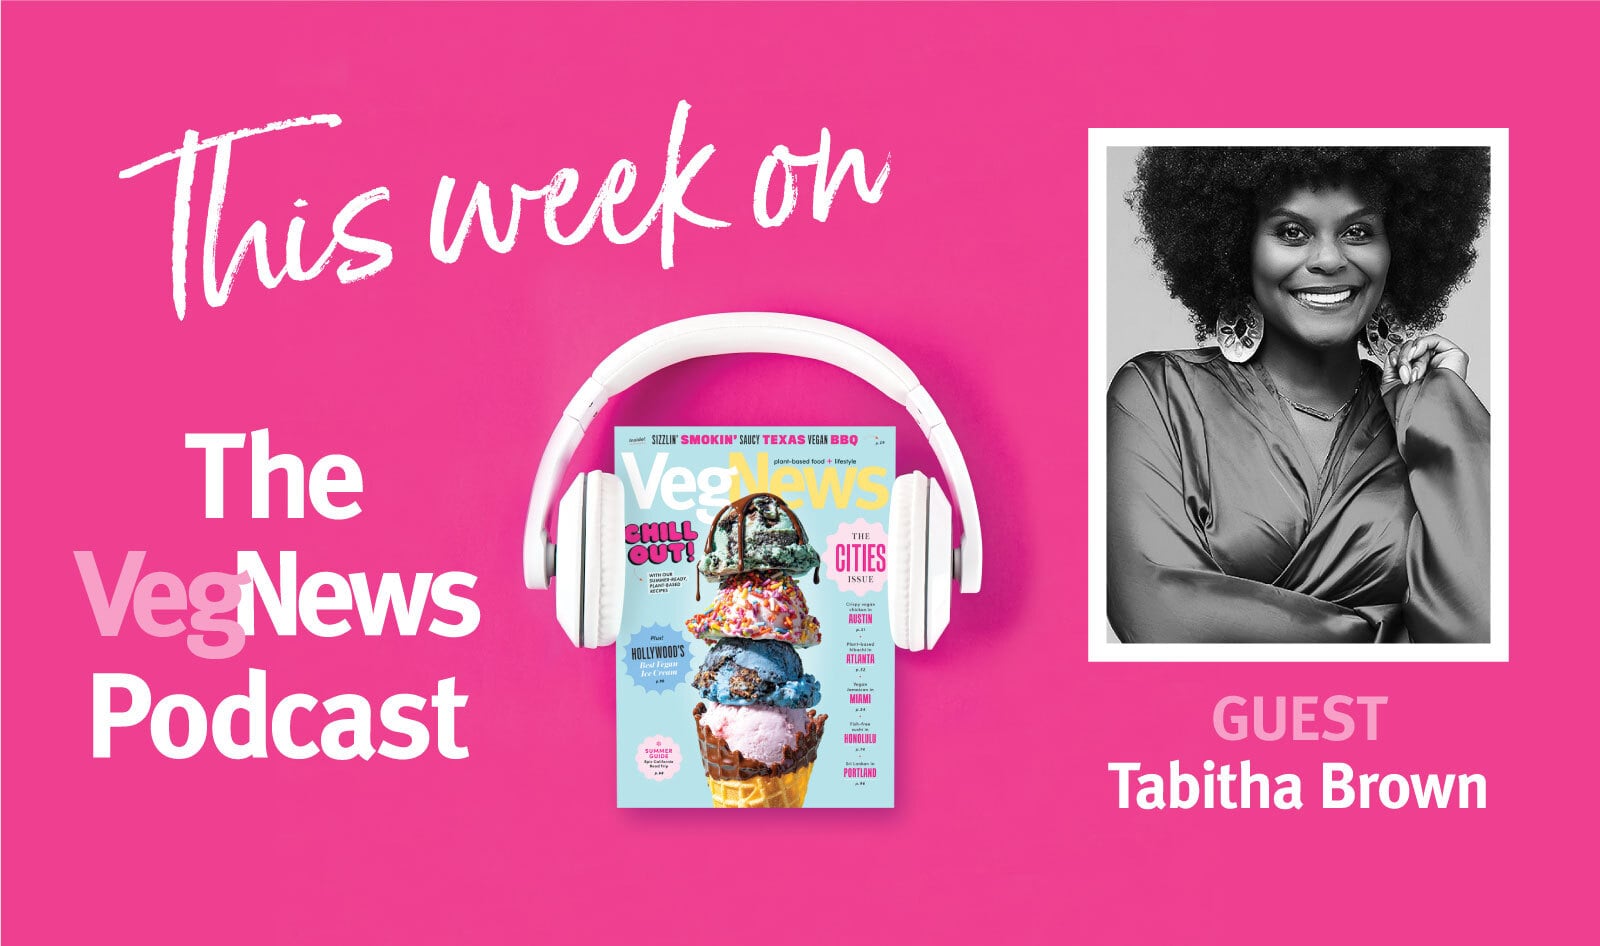 The VegNews Podcast Show Notes: Episode 1